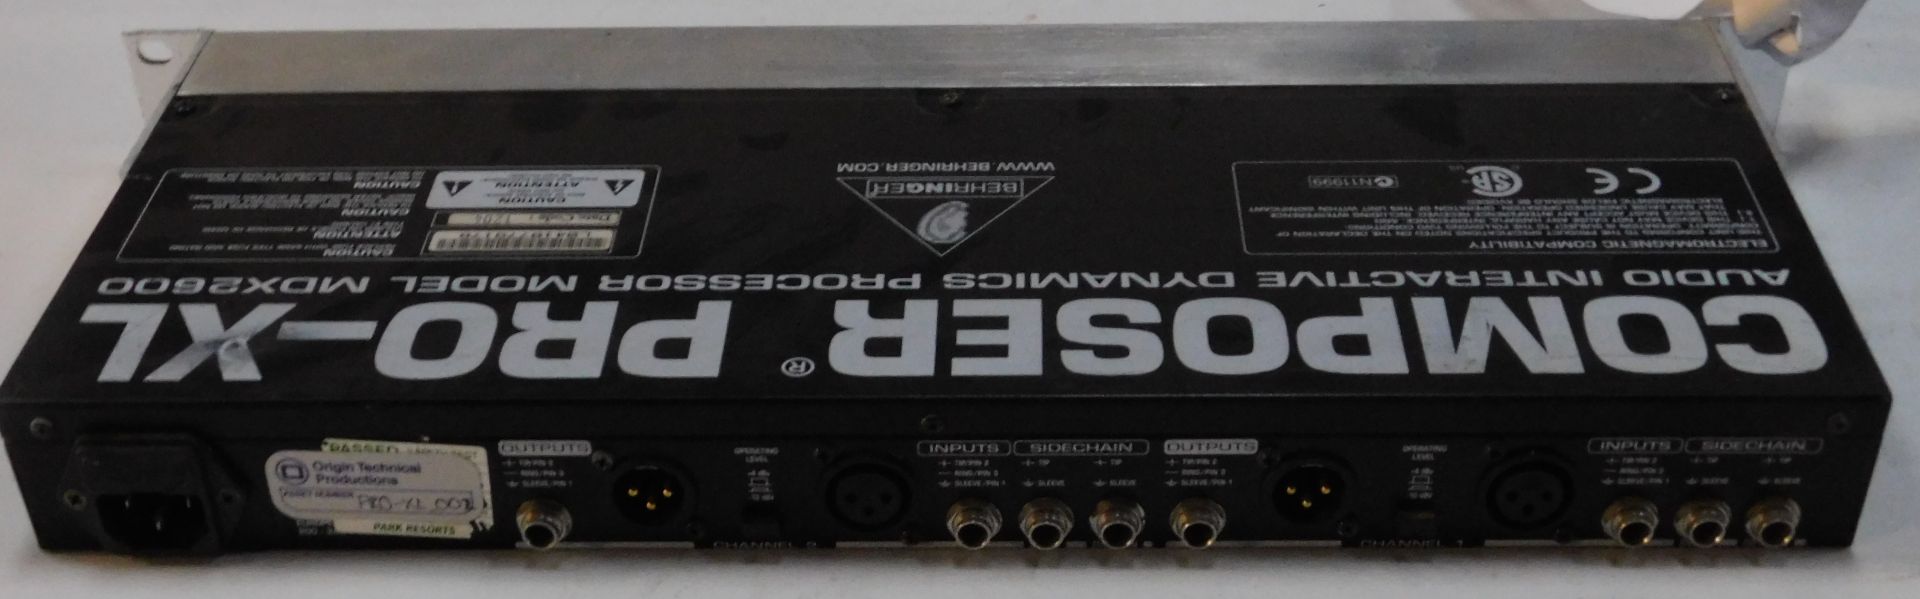 FBW Ultragraph Pro 31-Band Graphical Equalizer with Feedback Control, Model FBQ3102; 2 Behringer - Image 18 of 19